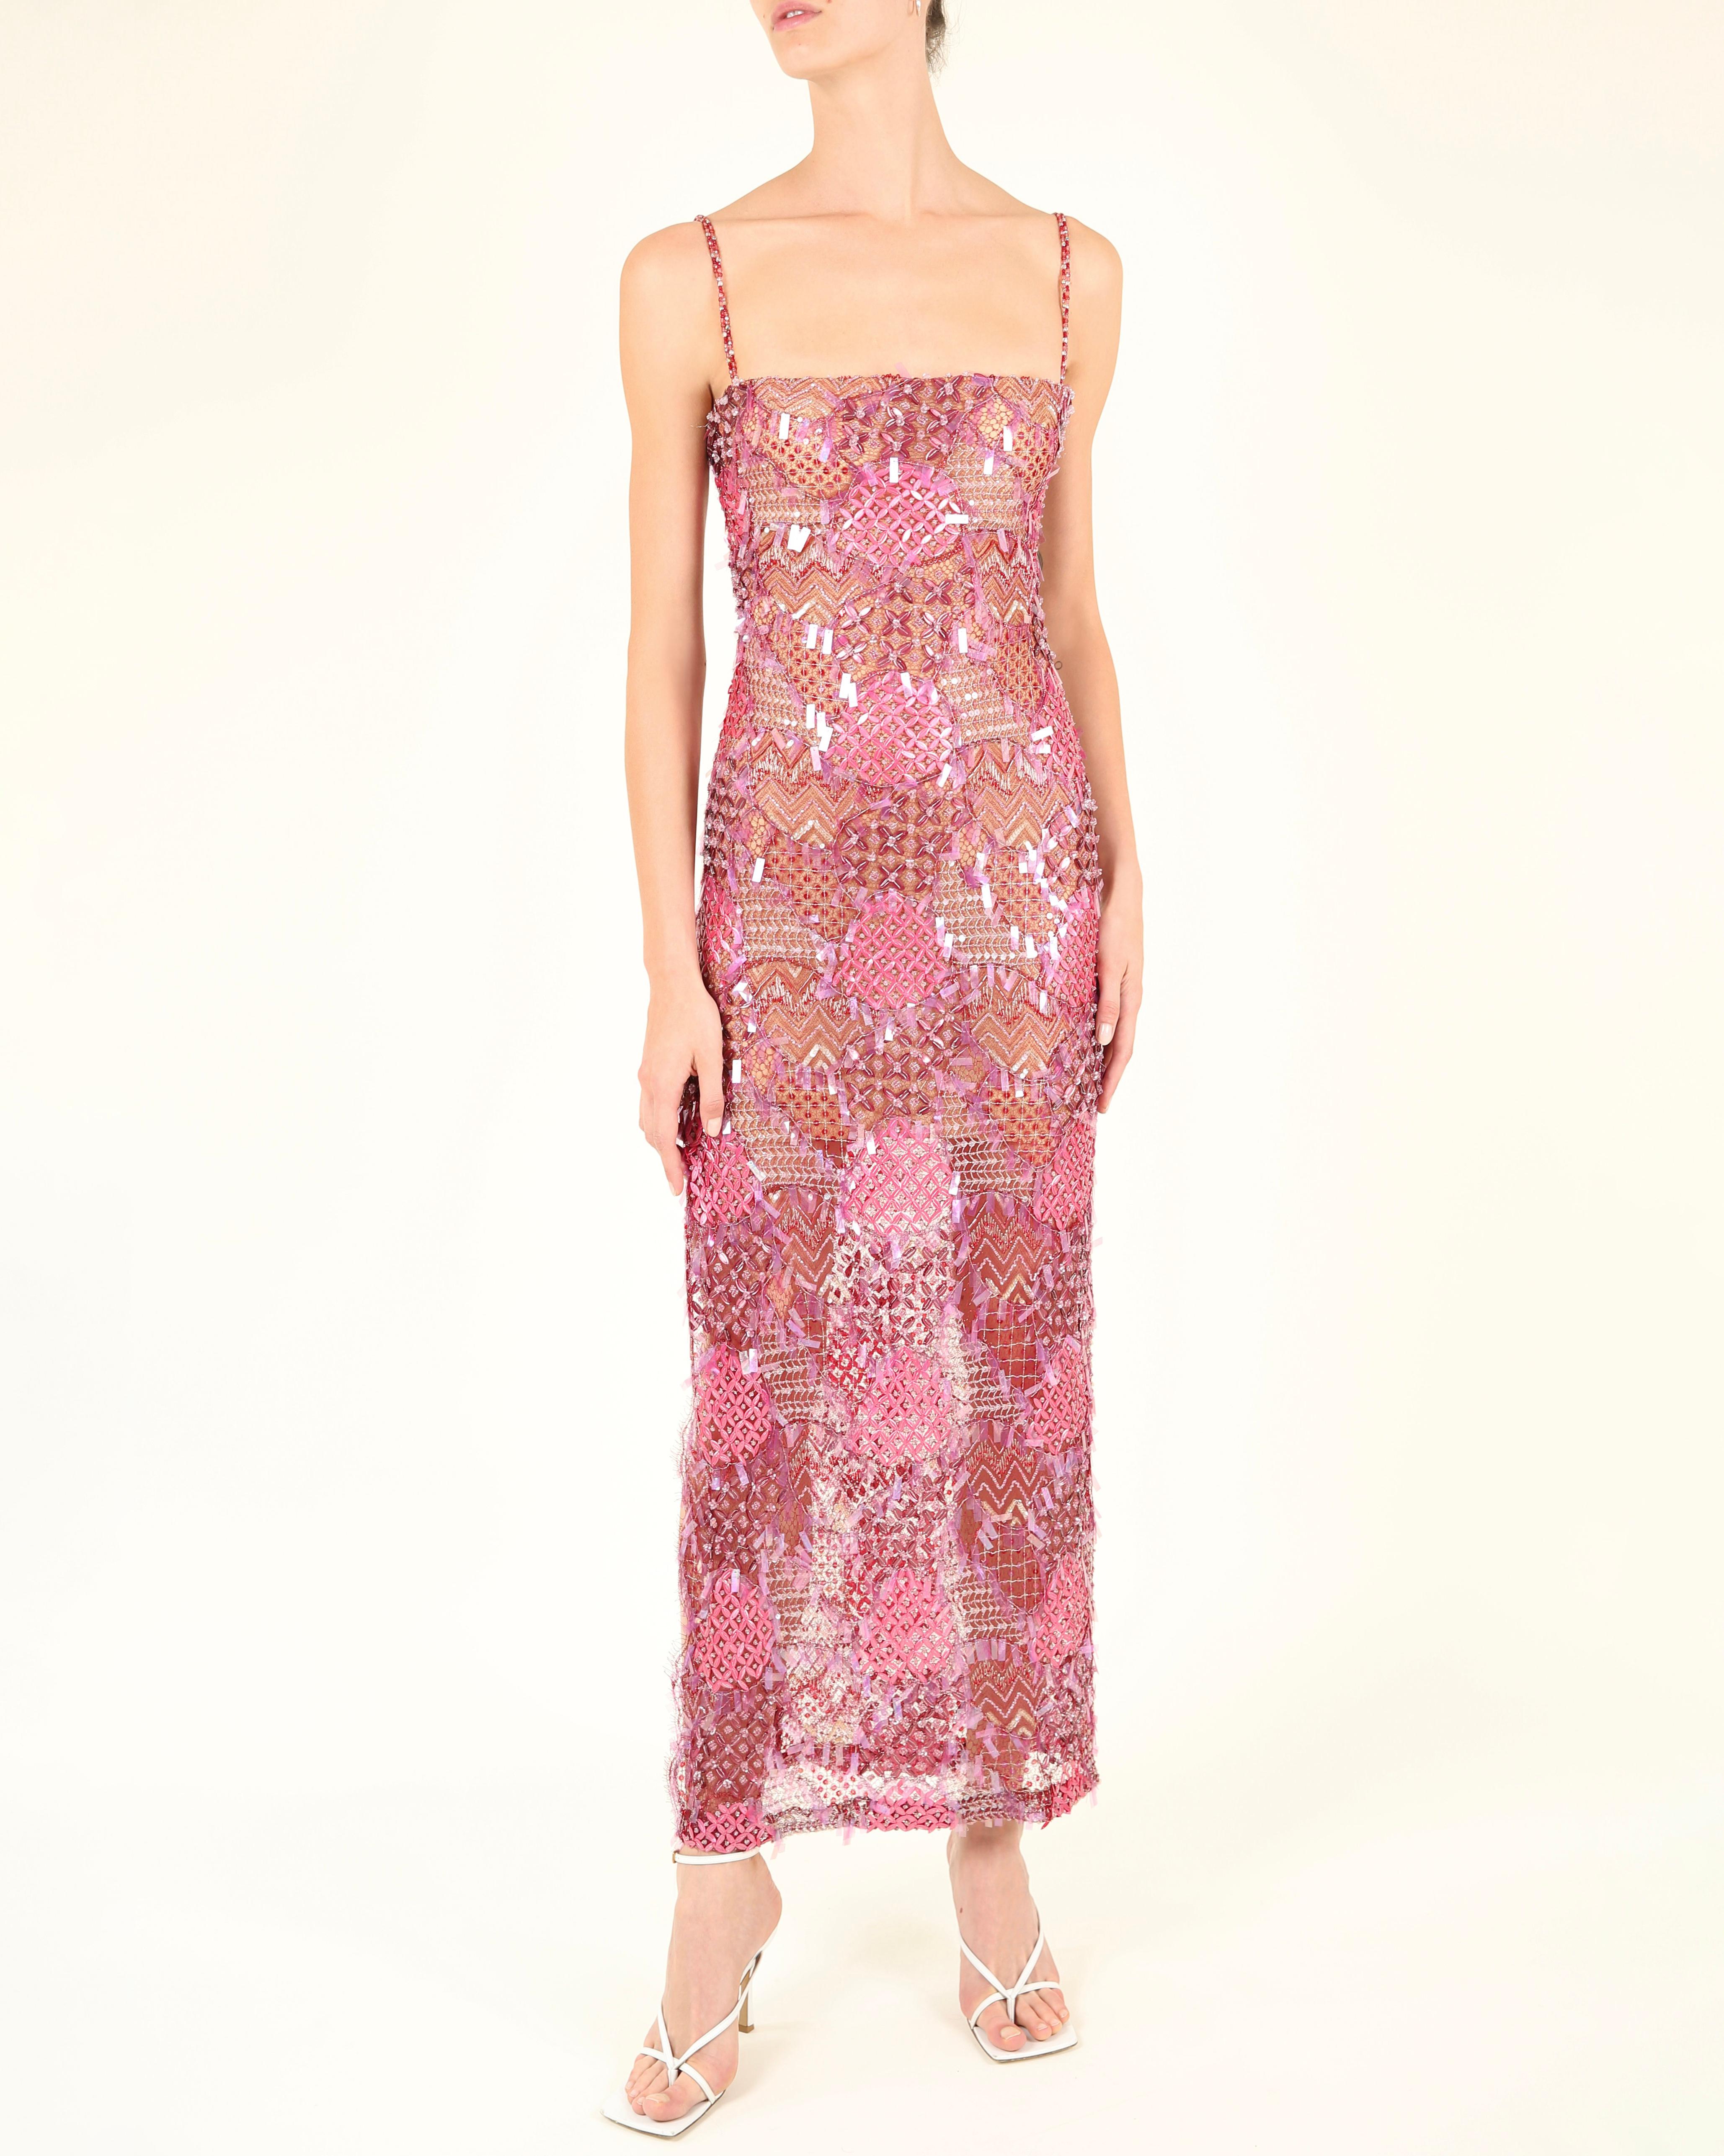 Loris Azzaro couture pink embellished sequin beaded sheer slit bustier dress XS For Sale 7